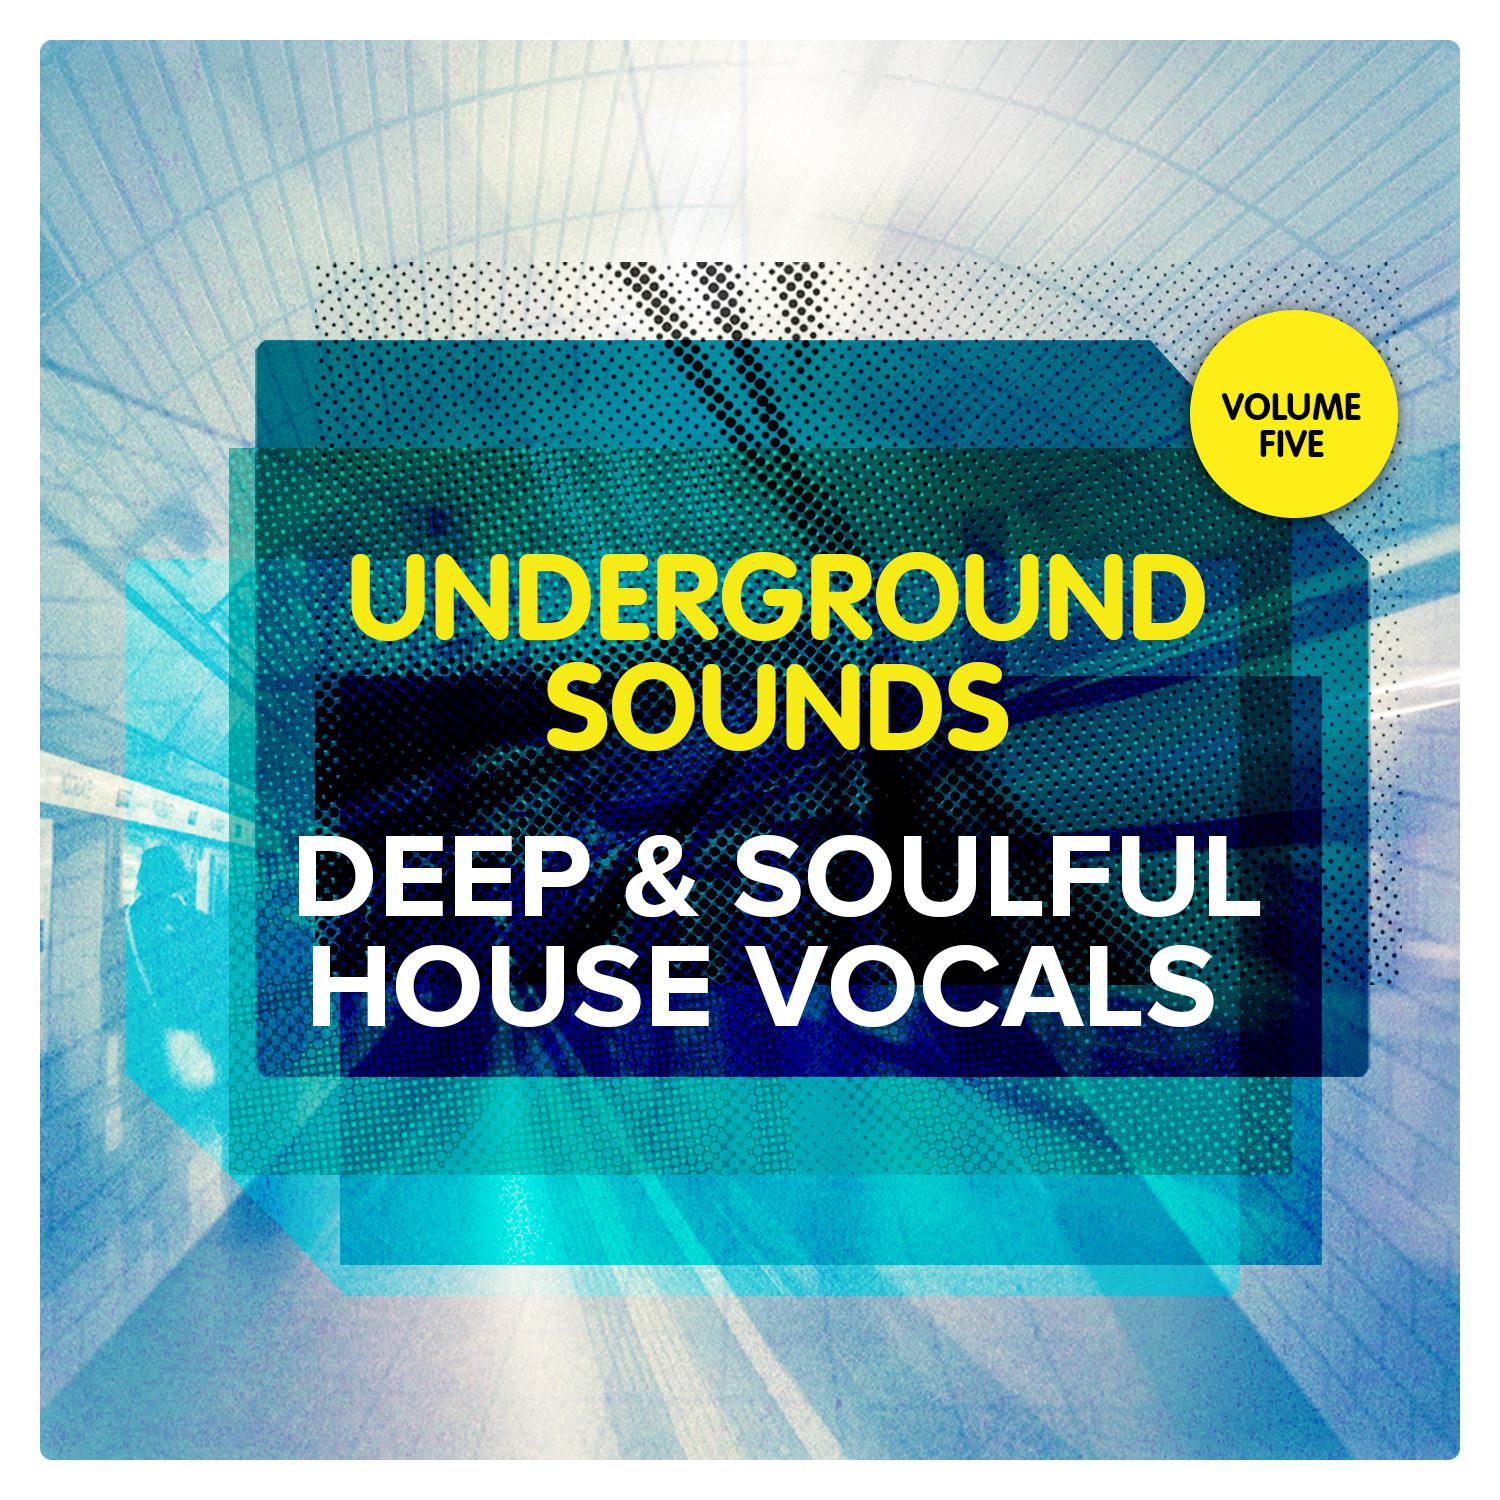 Deep & Soulful House Vocals - Underground Sounds, Vol.5